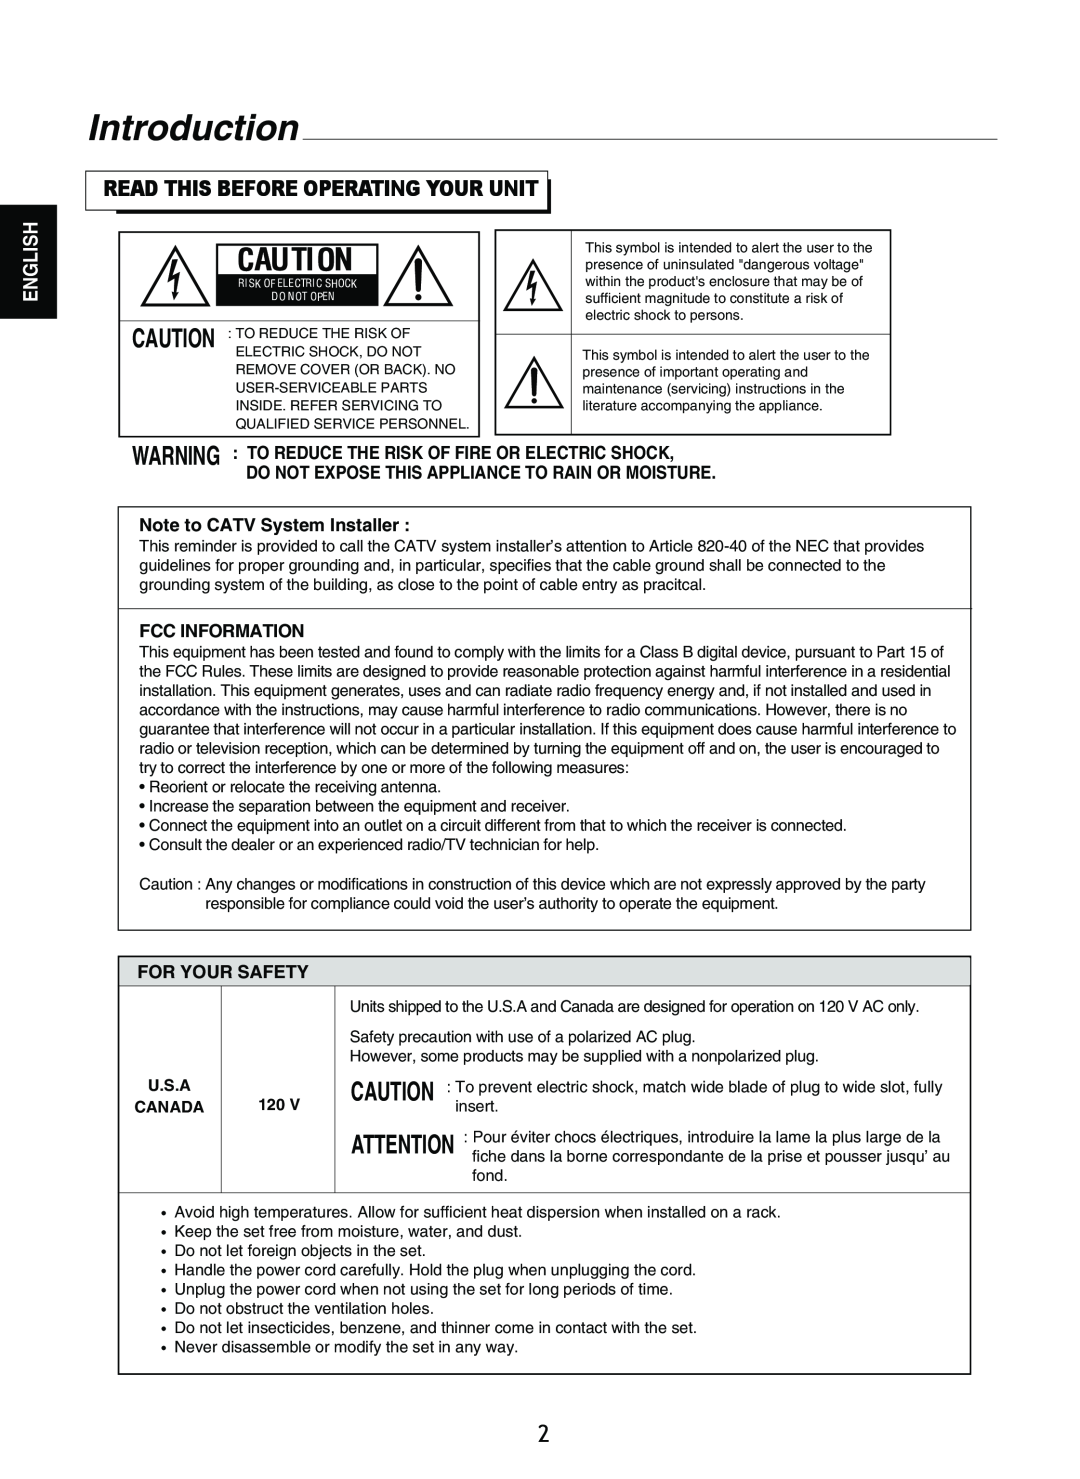 Sherwood R-865 Introduction, Read This Before Operating Your Unit, English, Note to CATV System Installer, Fcc Information 